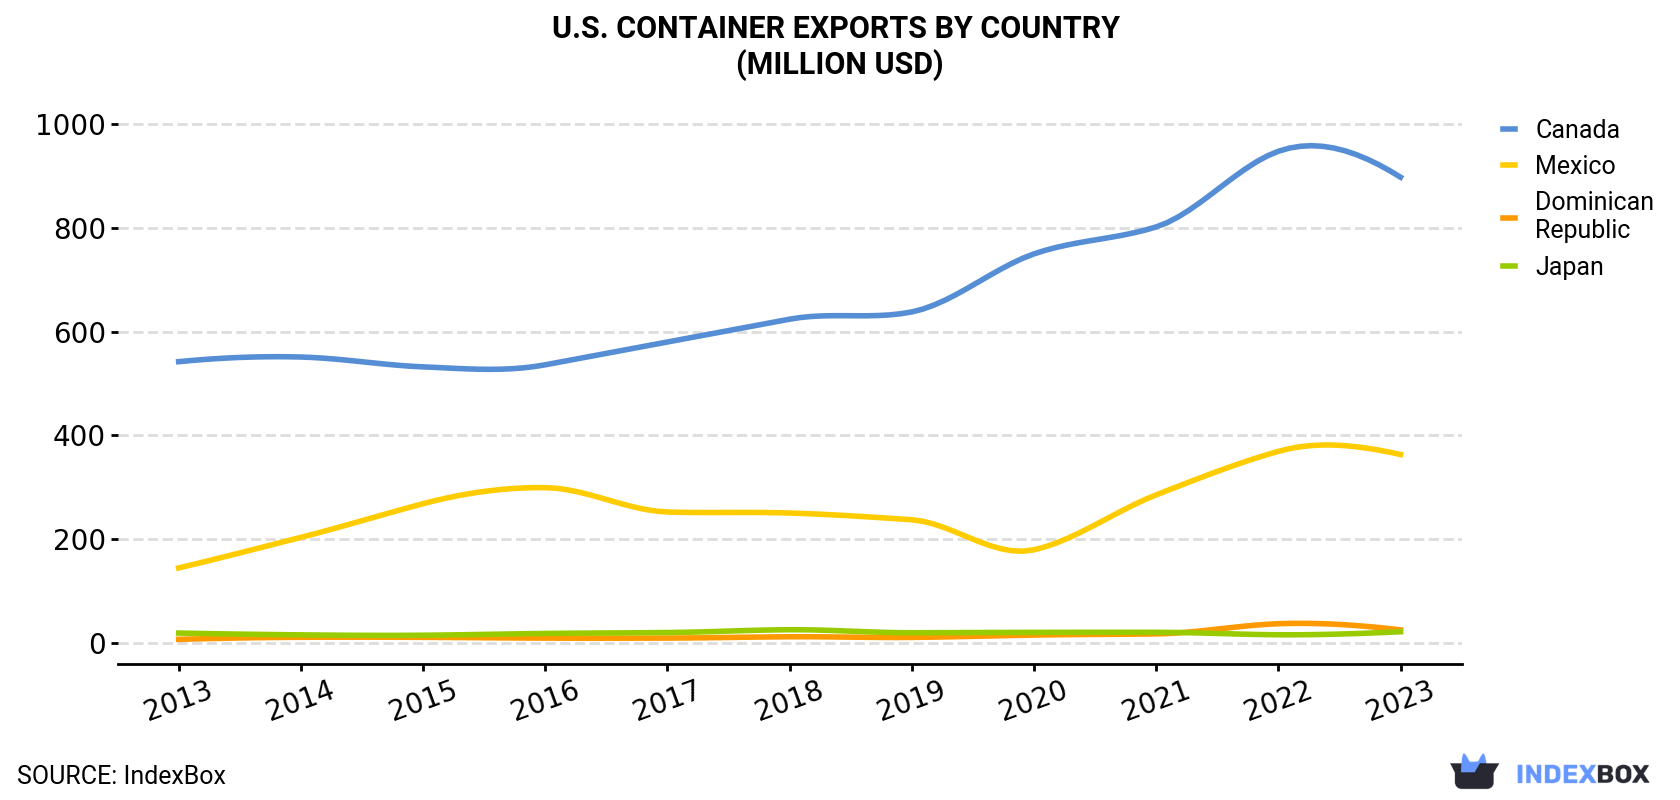 U.S. Container Exports By Country (Million USD)